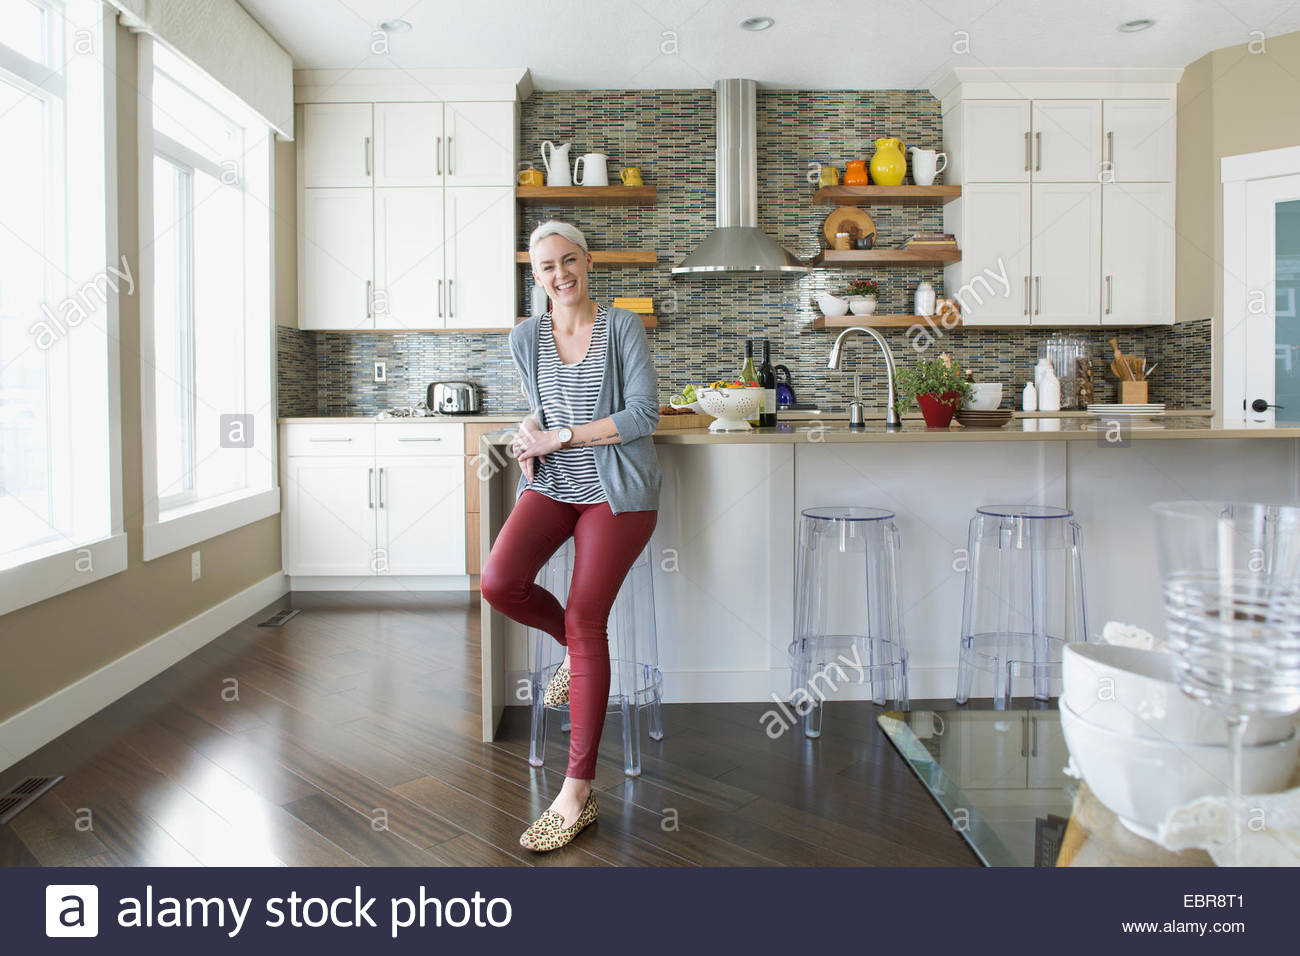 Portrait of smiling woman in kitchen Stock Photo